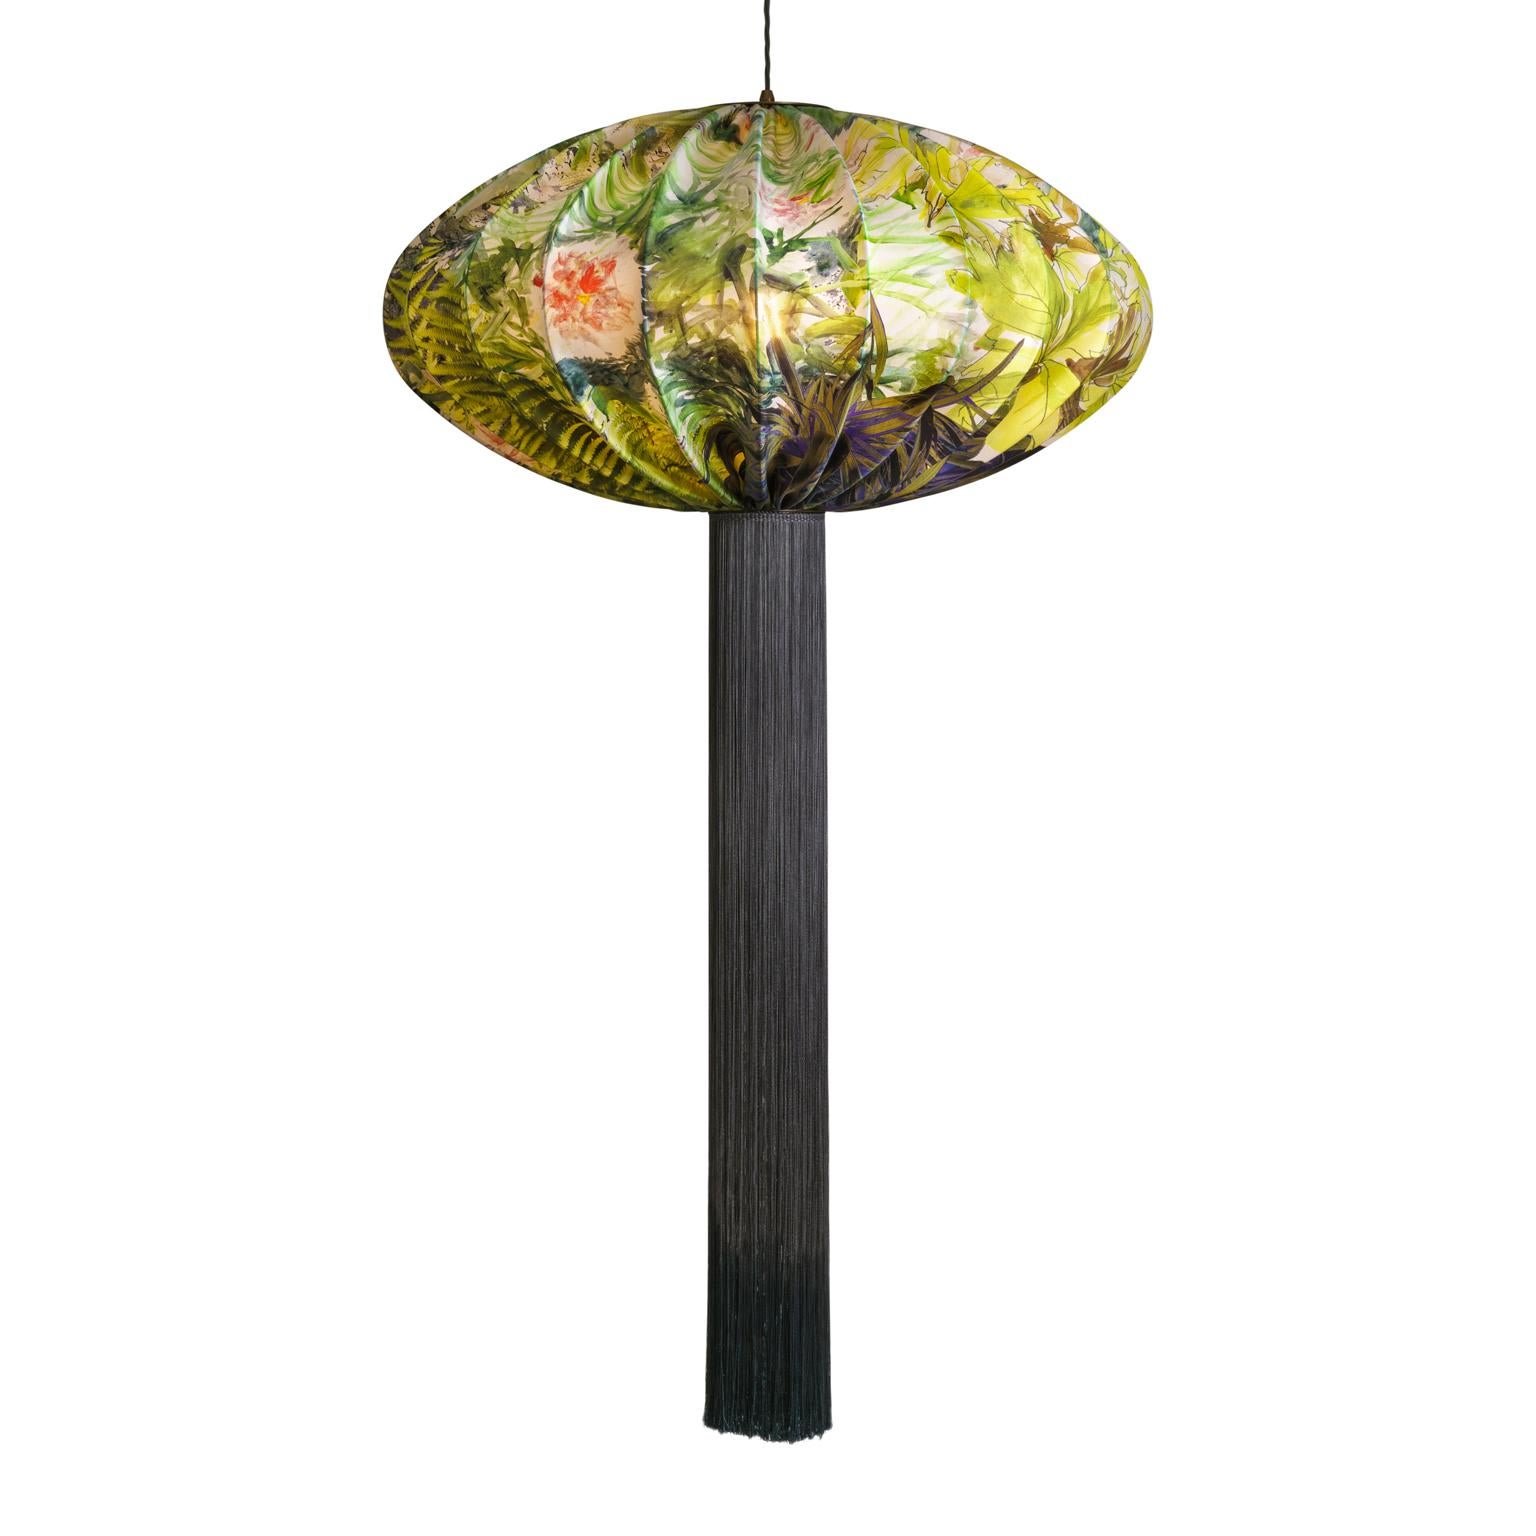 The Ume Lantern focuses on the translucent natural material of Dupion silk with imagery of an English garden with the influence of traditional Chinese lanterns.

The nature-inspired range was created using Esther Patterson’s original drawings and